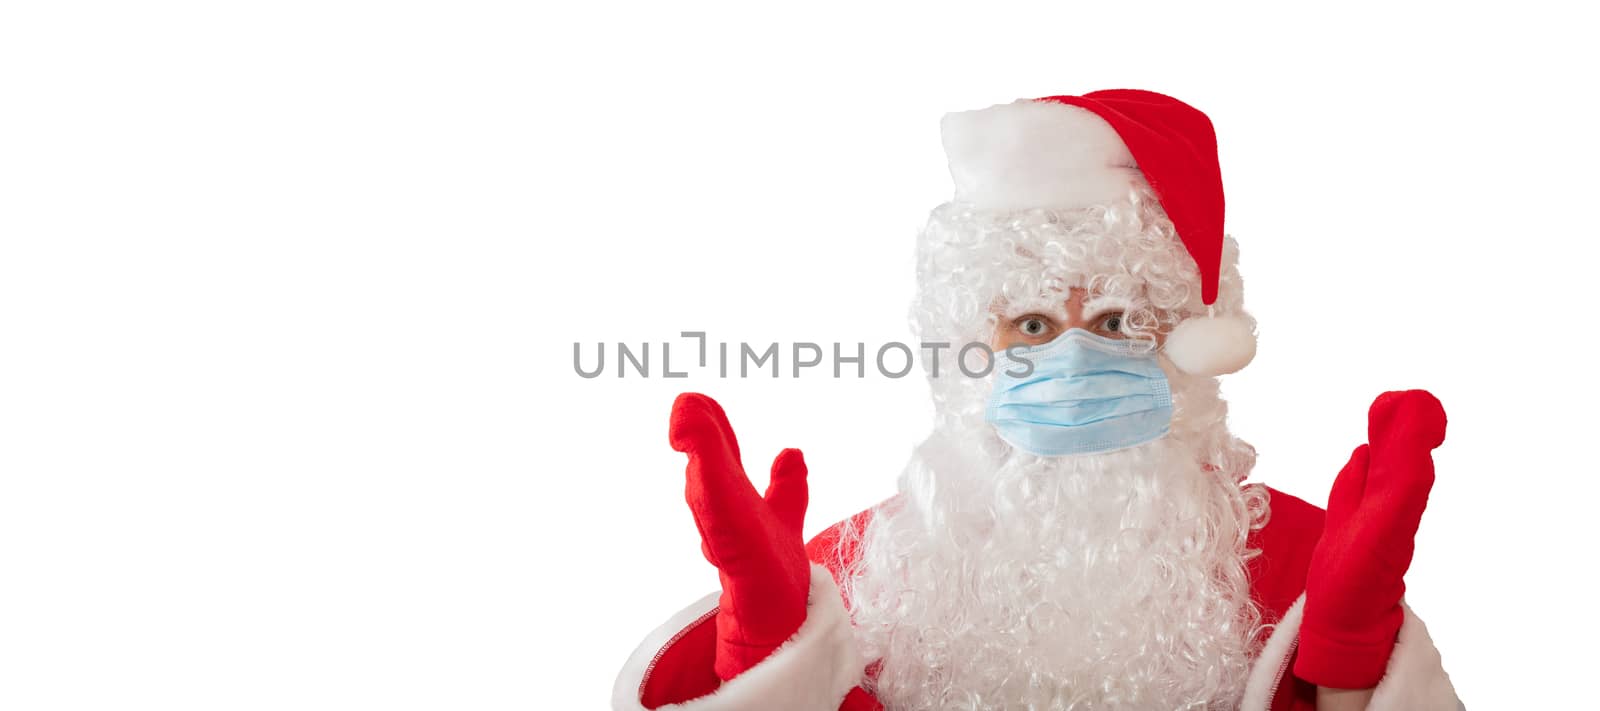 View of a man wearing a Santa Claus costume and medical mask with his arms, eyes wide open, isolated on white background. Man is upset. Banner size, copy space. New normal, pandemic holiday concepts.